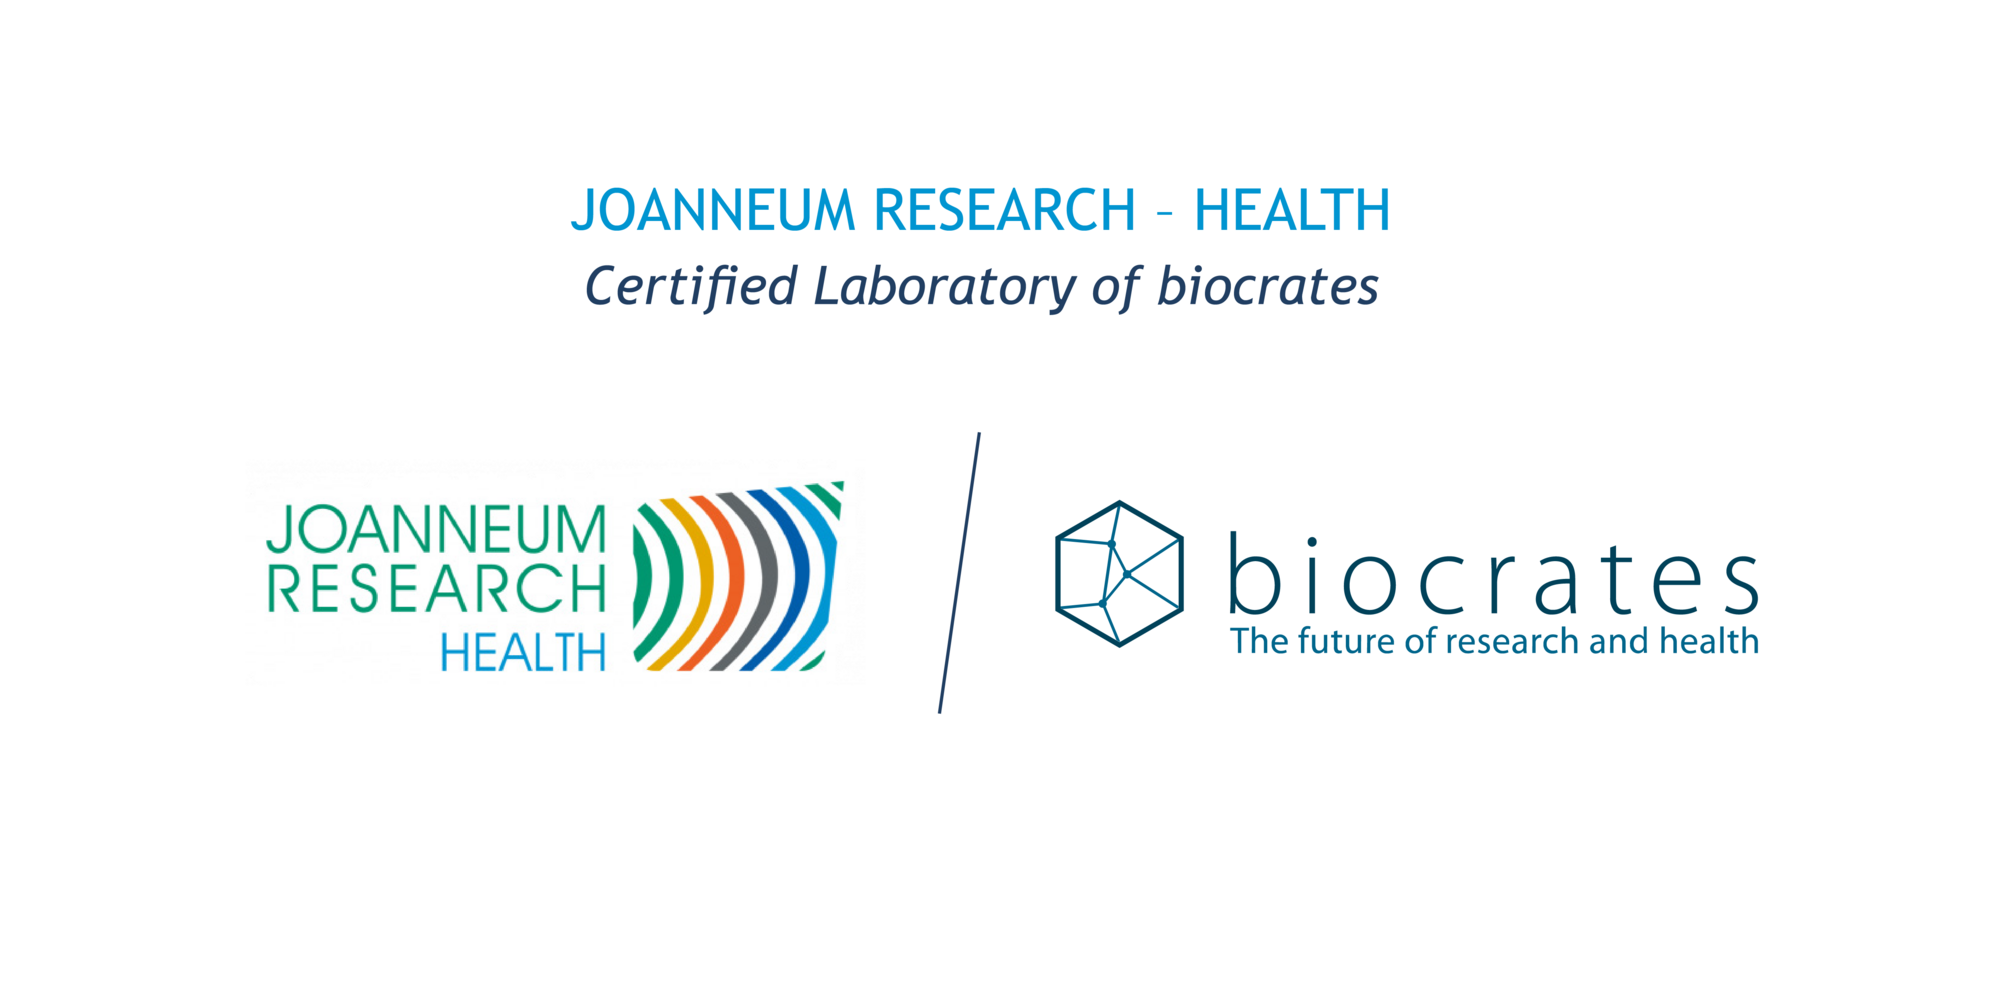 Certified Laboratory of biocrates - Joanneum Research